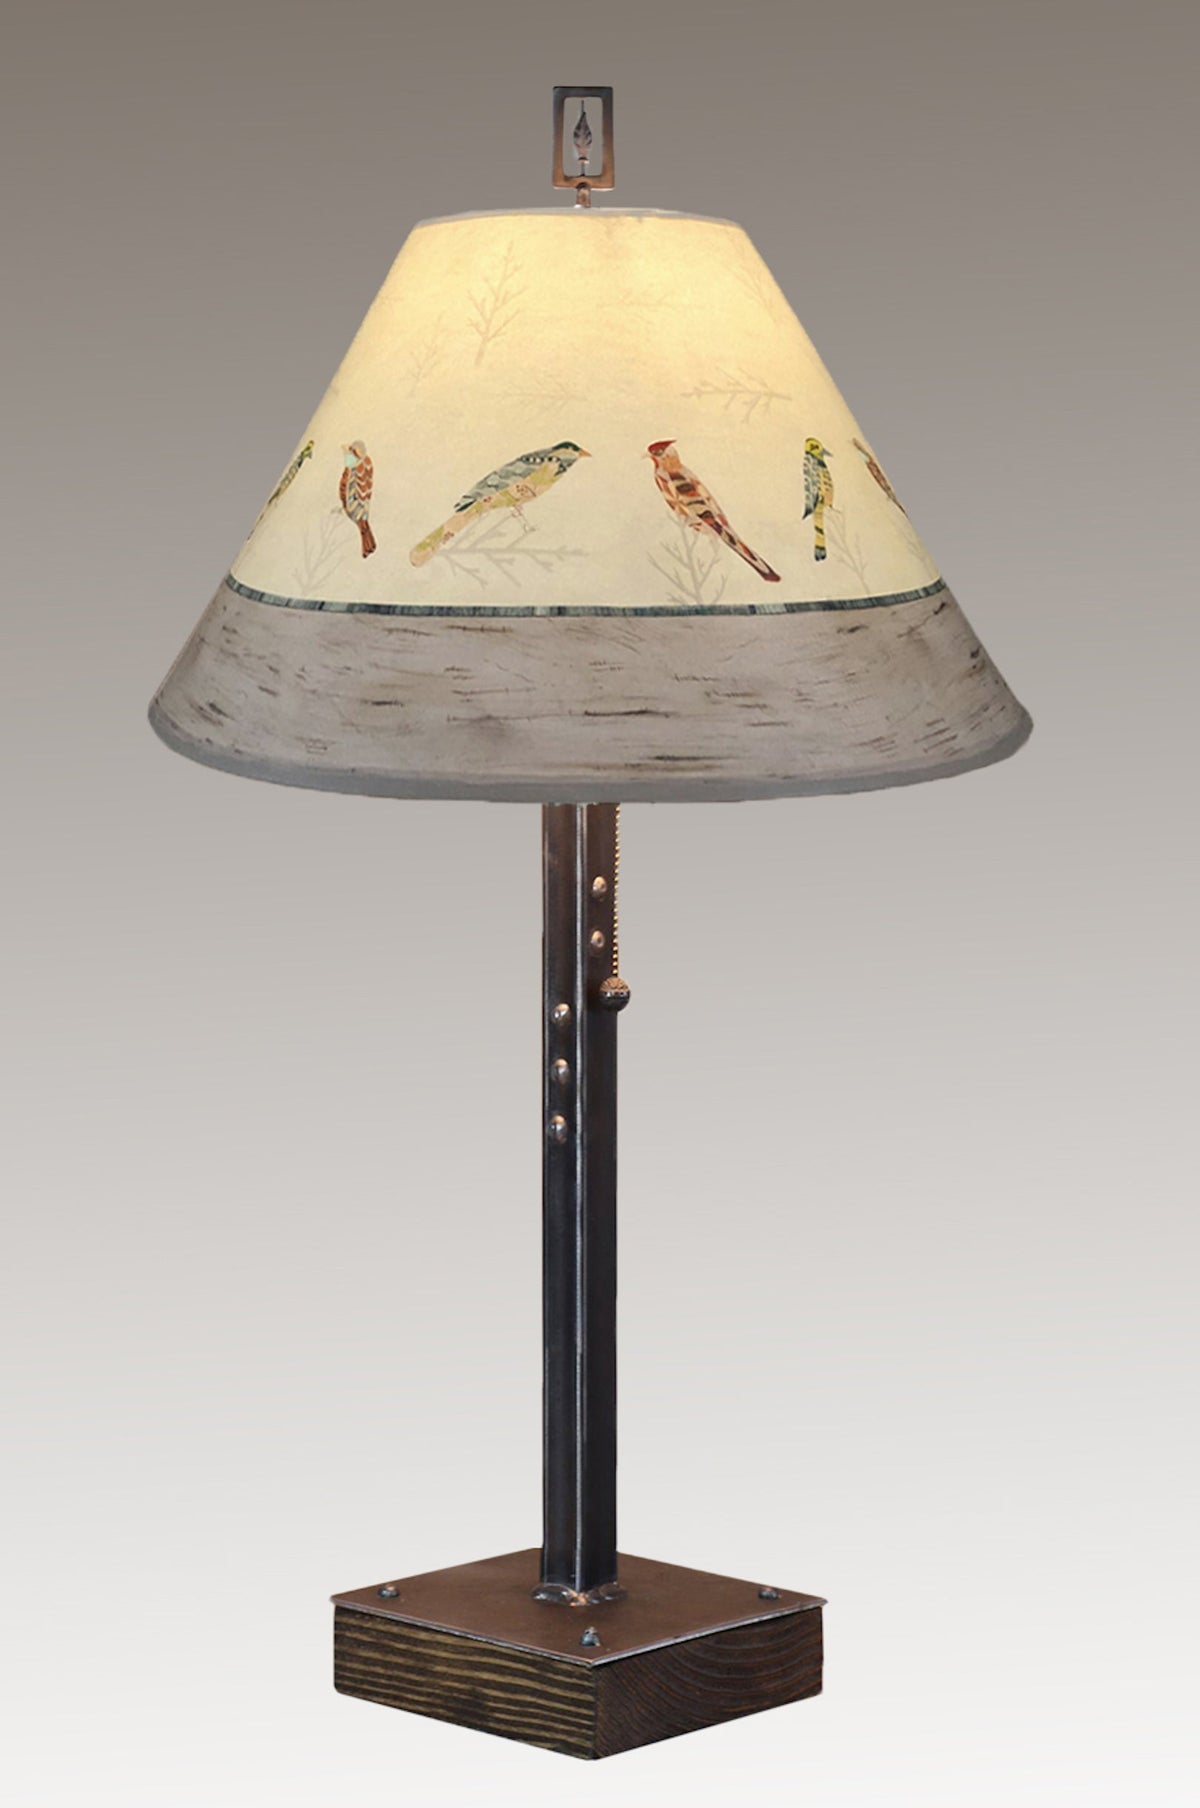 Steel Table Lamp on Wood with Medium Conical Shade in Bird Friends